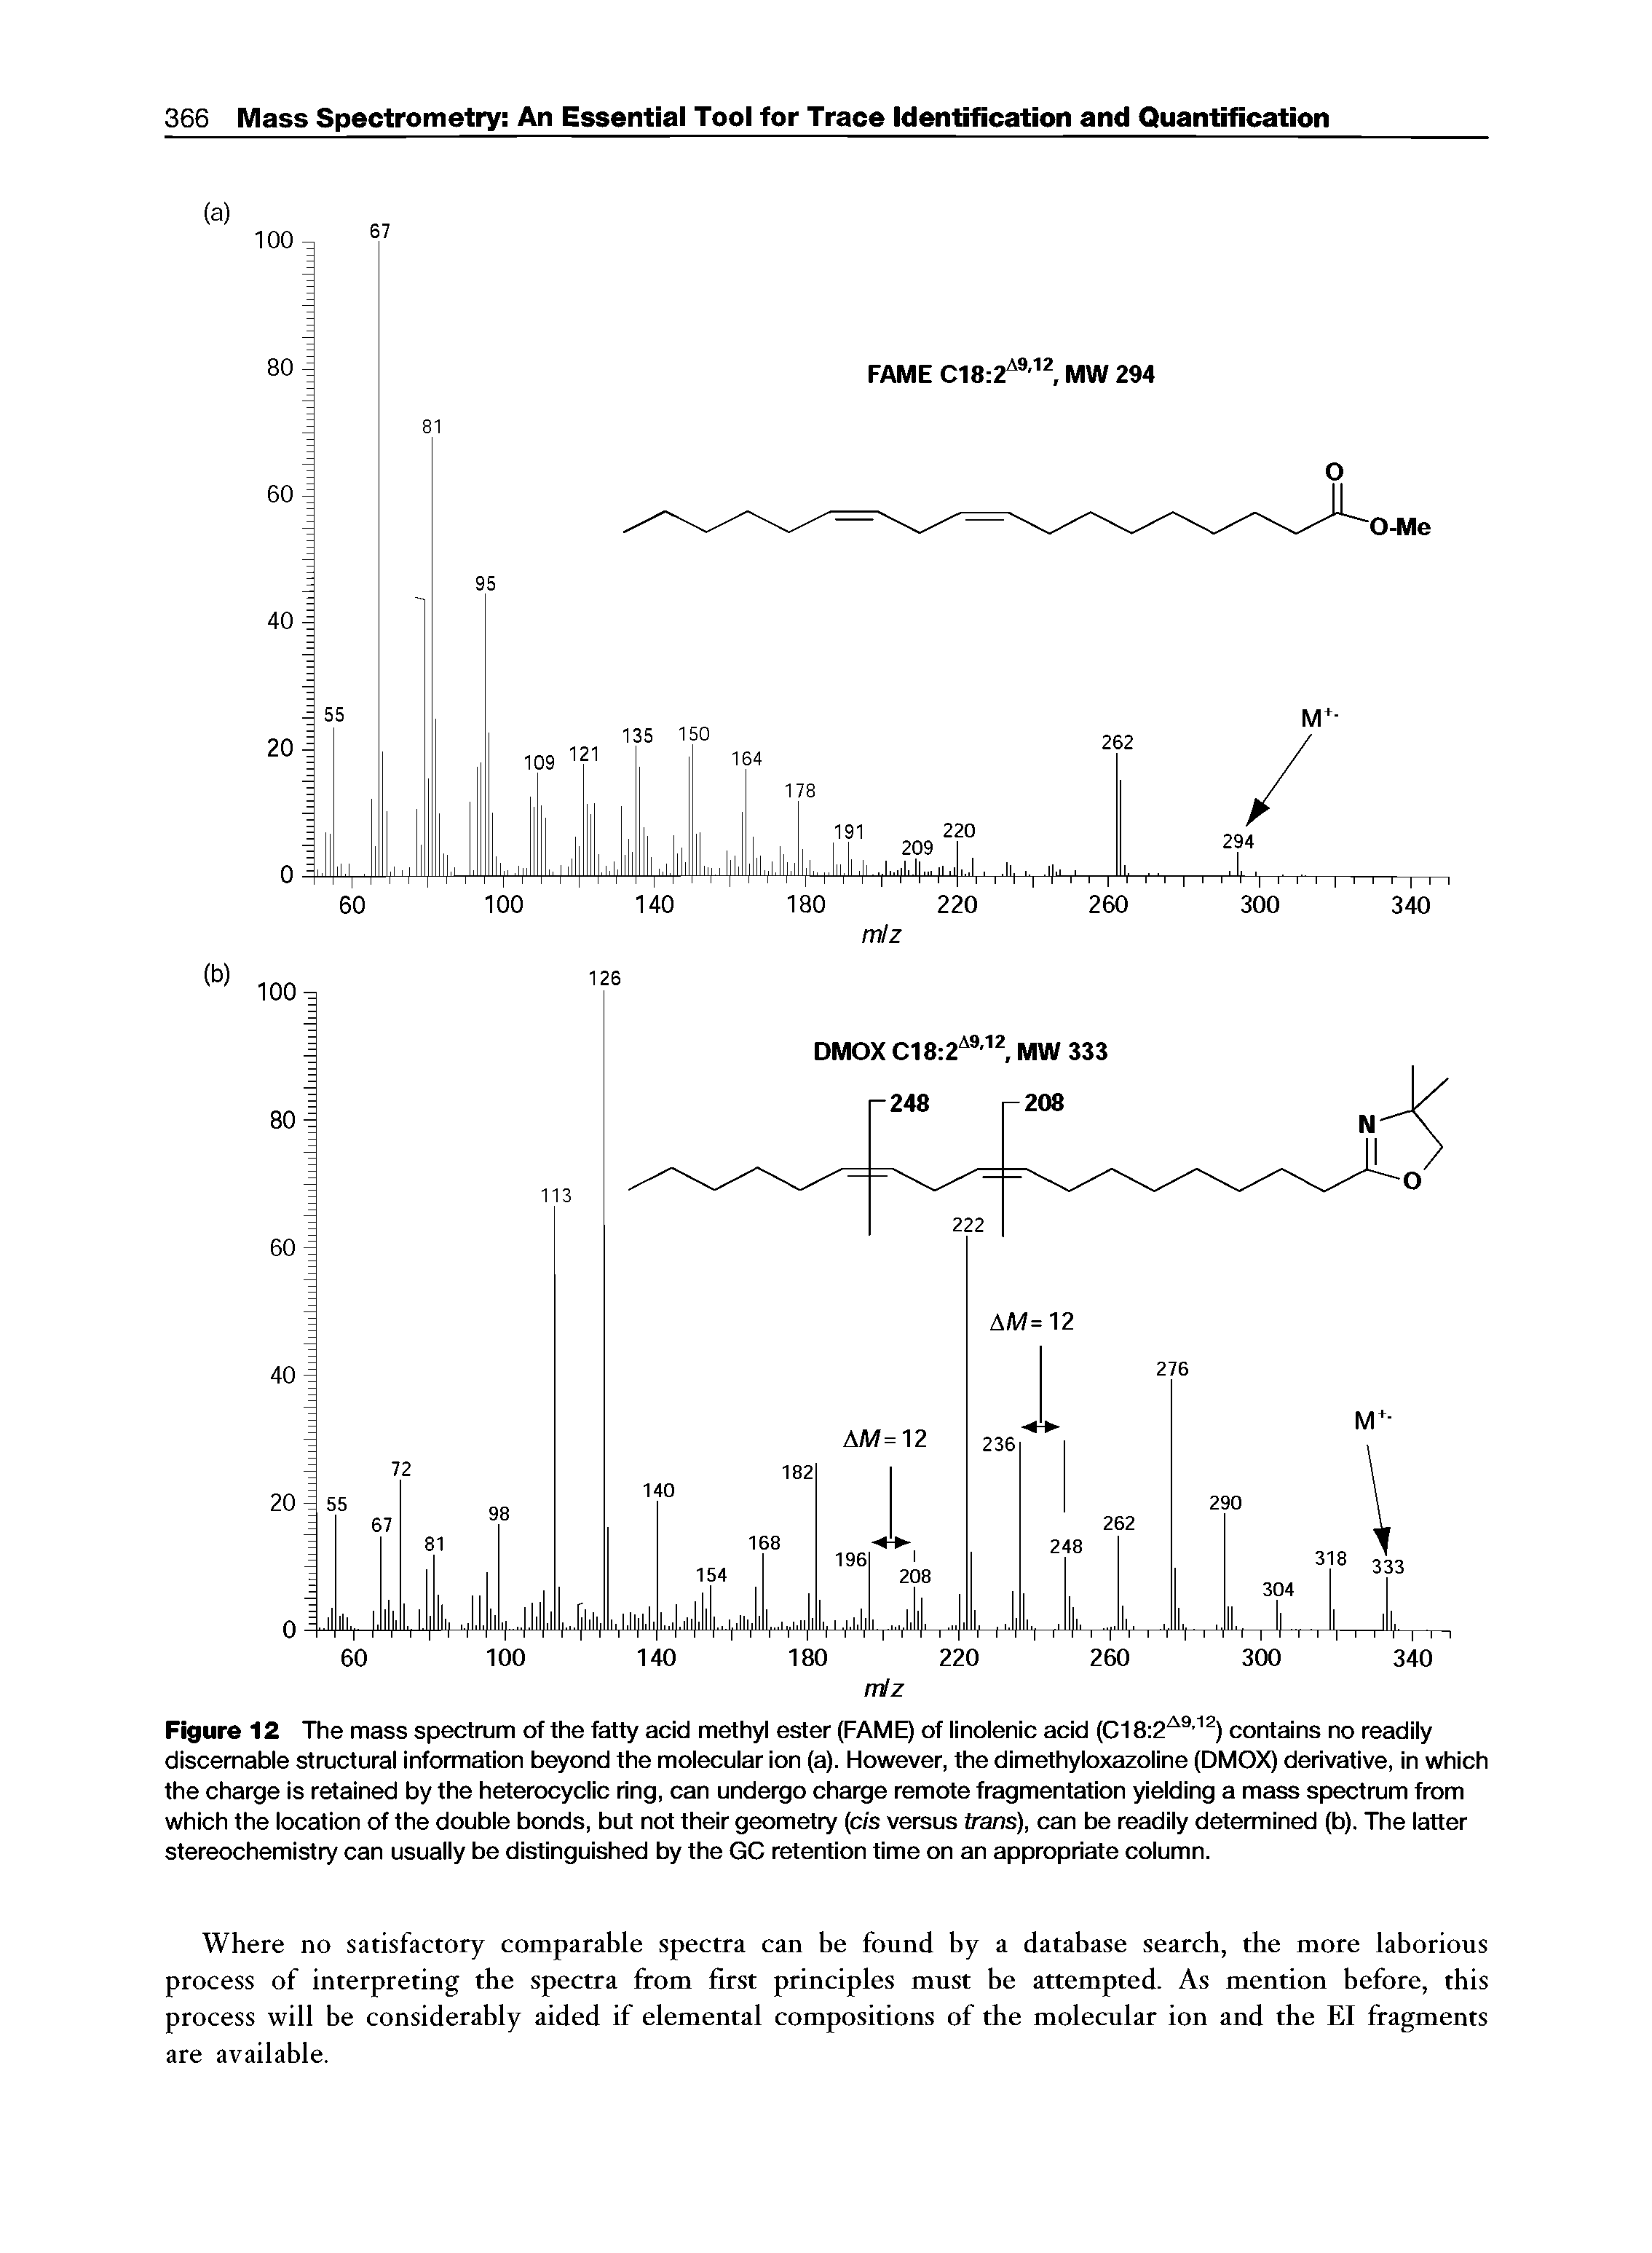 Figure 12 The mass spectrum of the fatty acid methyl ester (FAME) of linolenic acid (C18 2A9-12) contains no readily discernable structural information beyond the molecular ion (a). However, the dimethyloxazoline (DMOX) derivative, in which the charge is retained by the heterocyclic ring, can undergo charge remote fragmentation yielding a mass spectrum from which the location of the double bonds, but not their geometry (c/ s versus trans), can be readily determined (b). The latter stereochemistry can usually be distinguished by the GC retention time on an appropriate column.